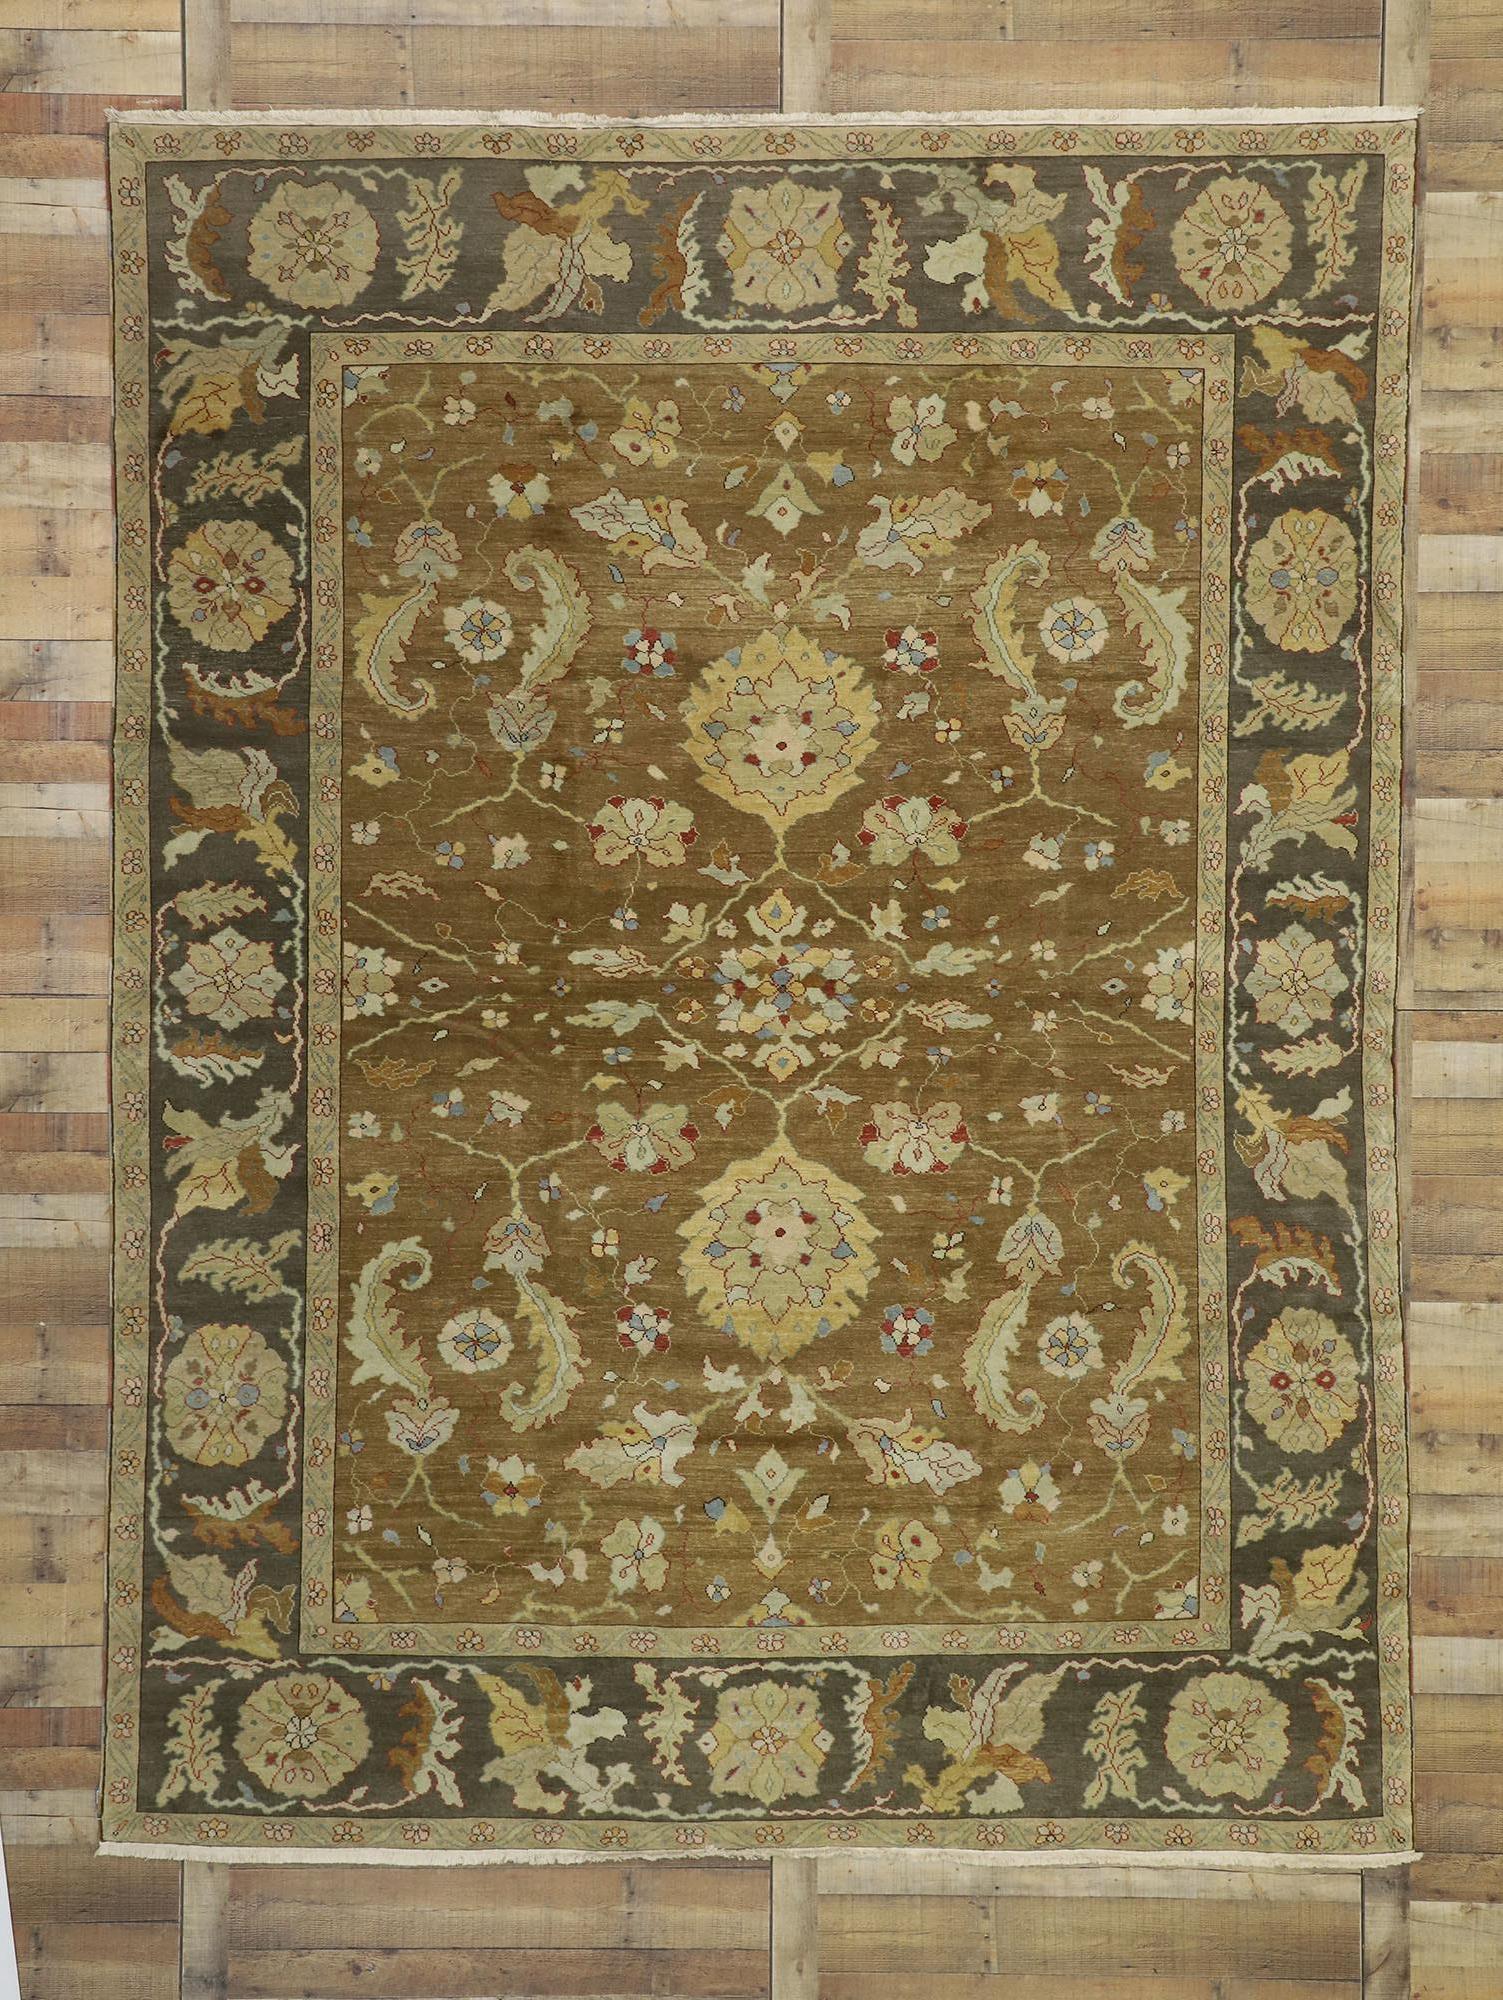 74372 Vintage Turkish Oushak Area Rug with Modern Style in Warm Colors 08’09 x 11’09. This hand-knotted wool vintage Turkish Oushak rug features an allover geometric design in warm colors. The warm brown field consists of two lush palmettes